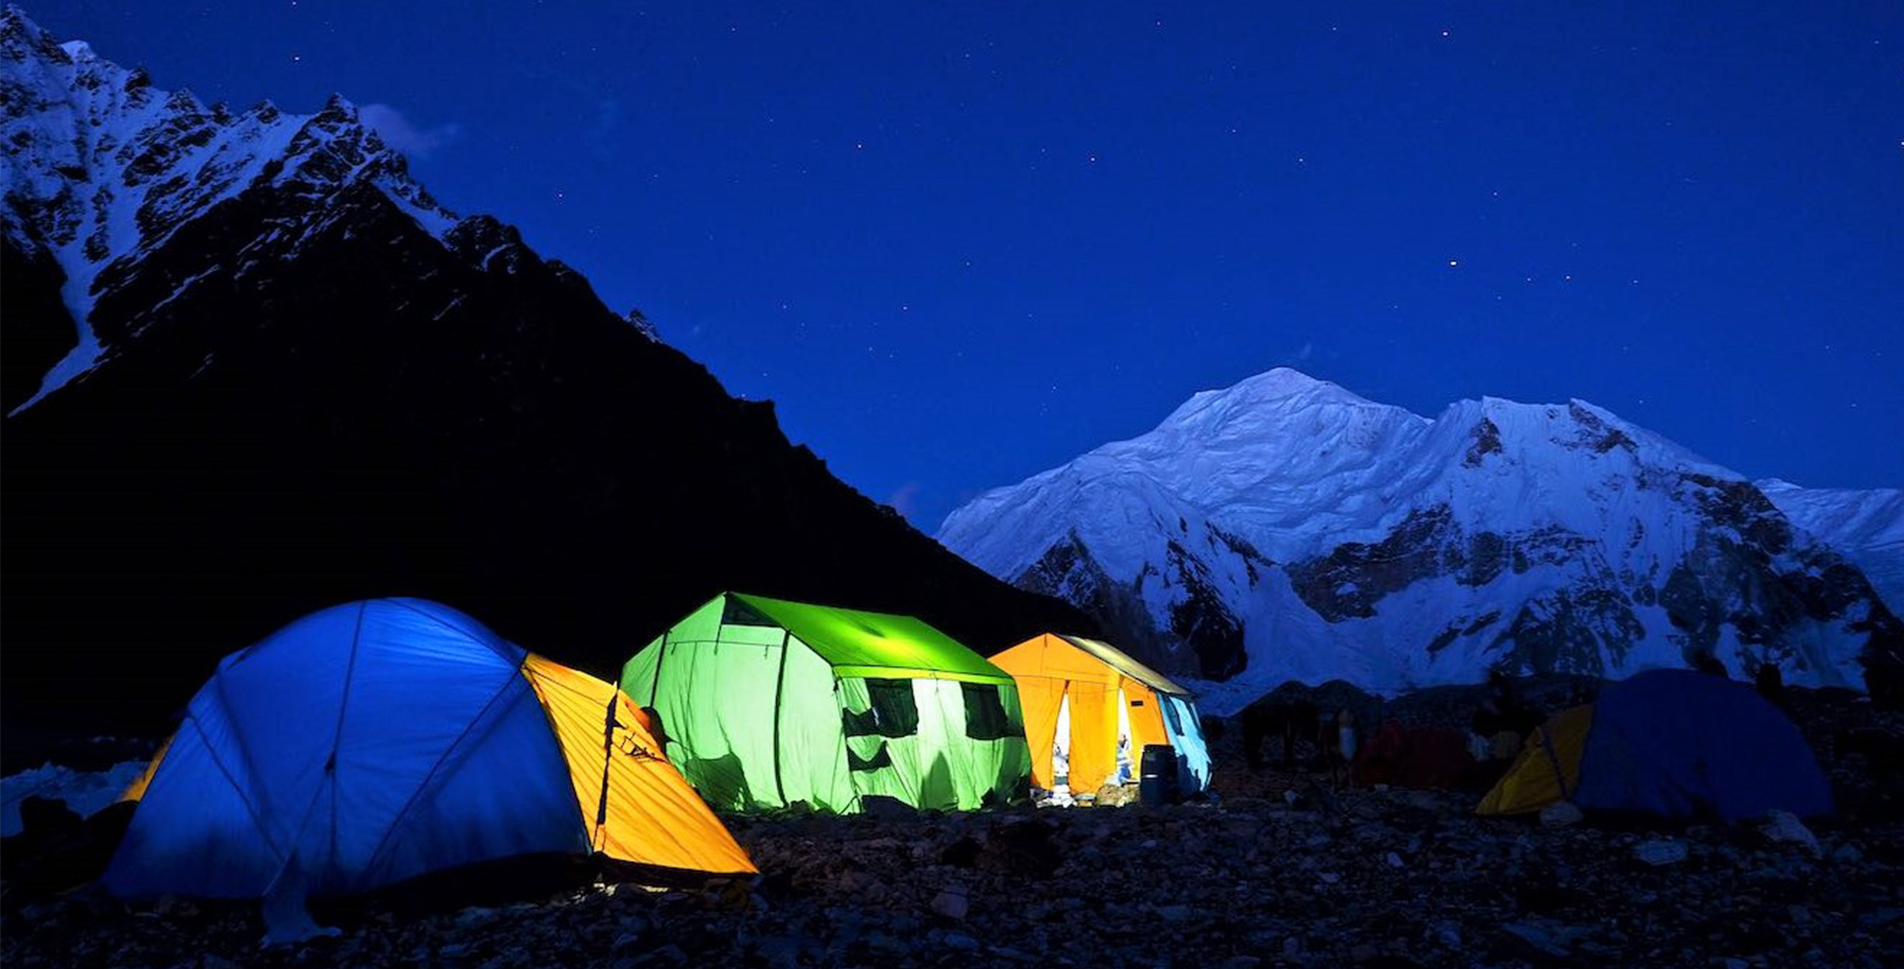 Gasherbrum Mountains Expedition: Conquer the Majestic Peaks of the Karakoram